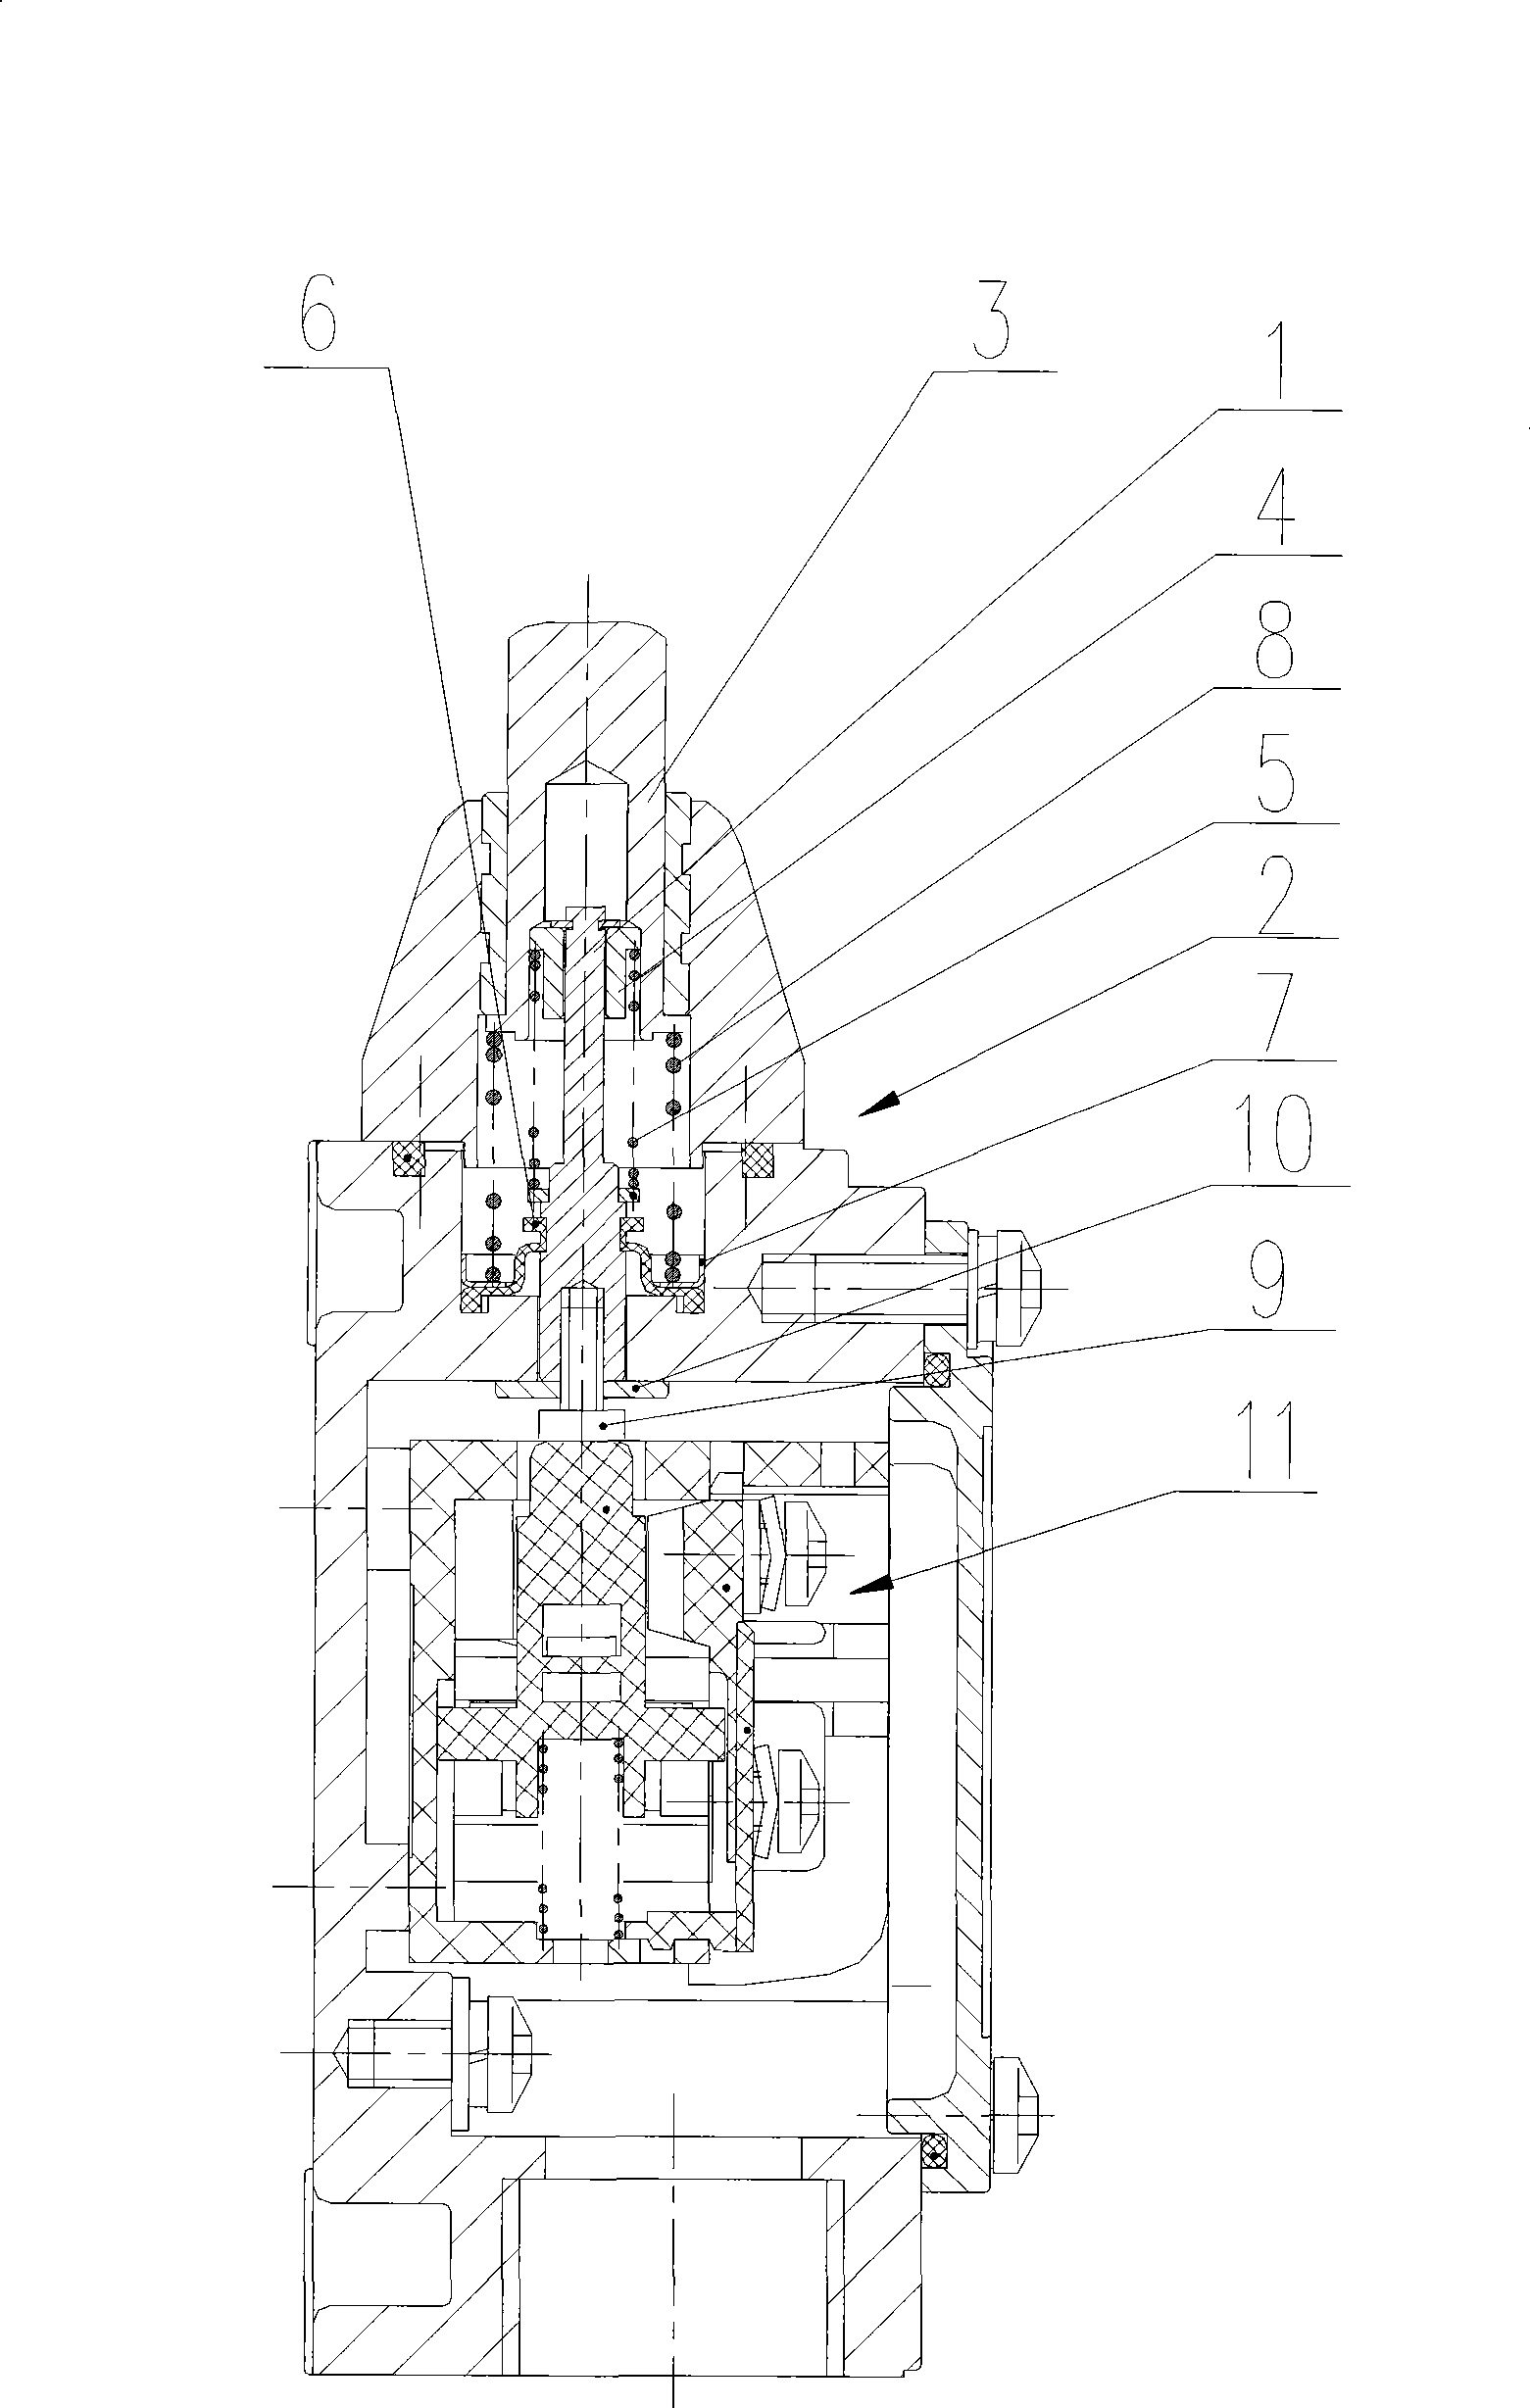 Direct-acting piston actuator for travel switch